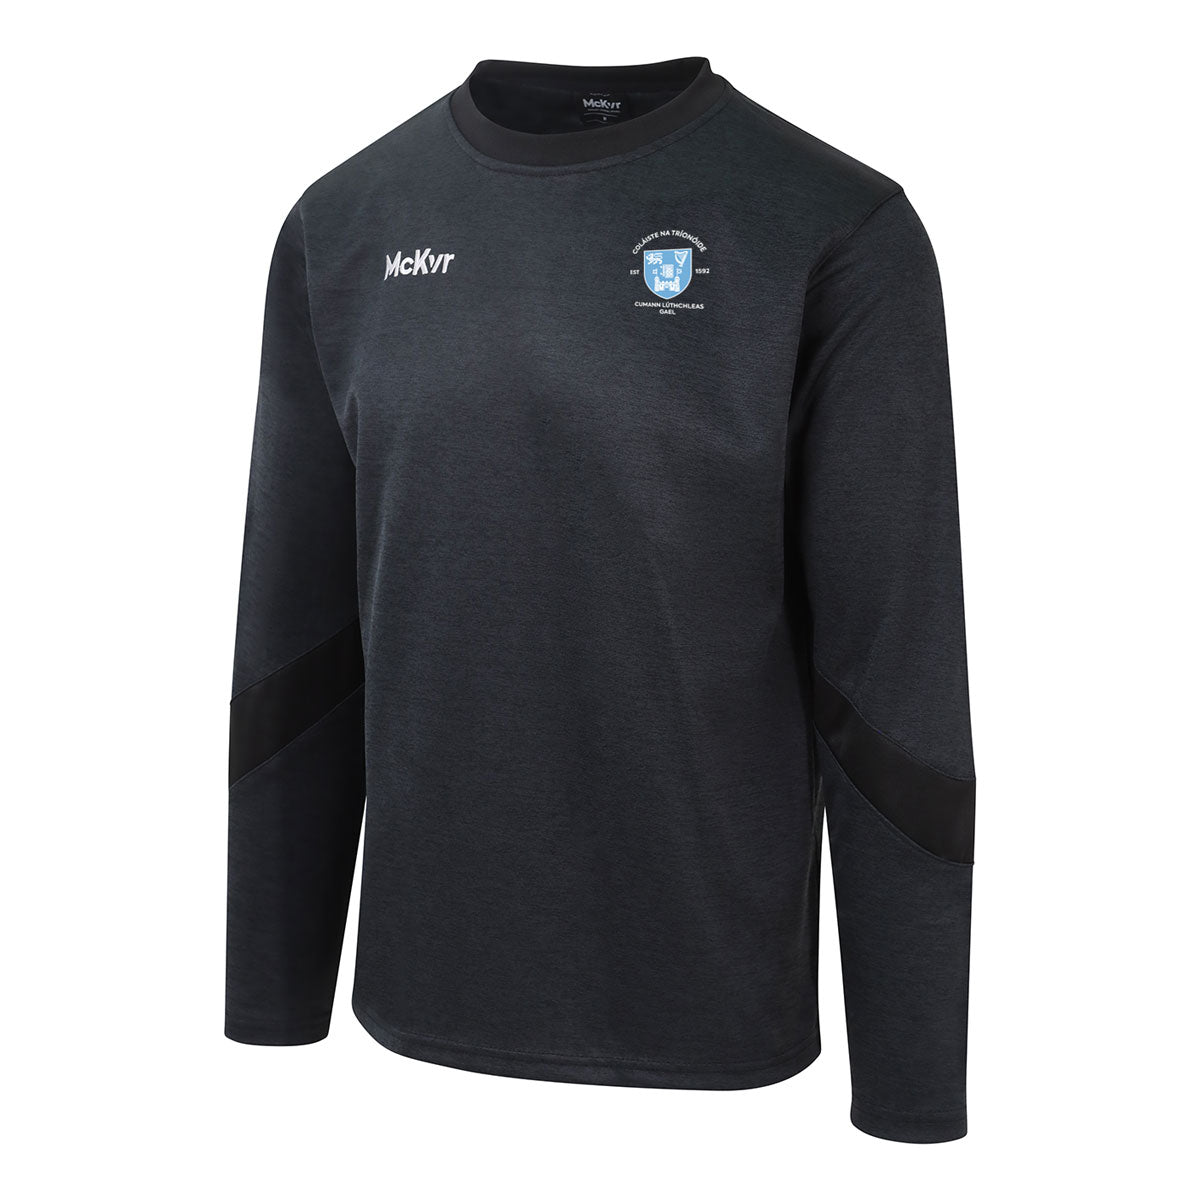 Mc Keever Trinity College Dublin Core 22 Sweat Top - Youth - Black